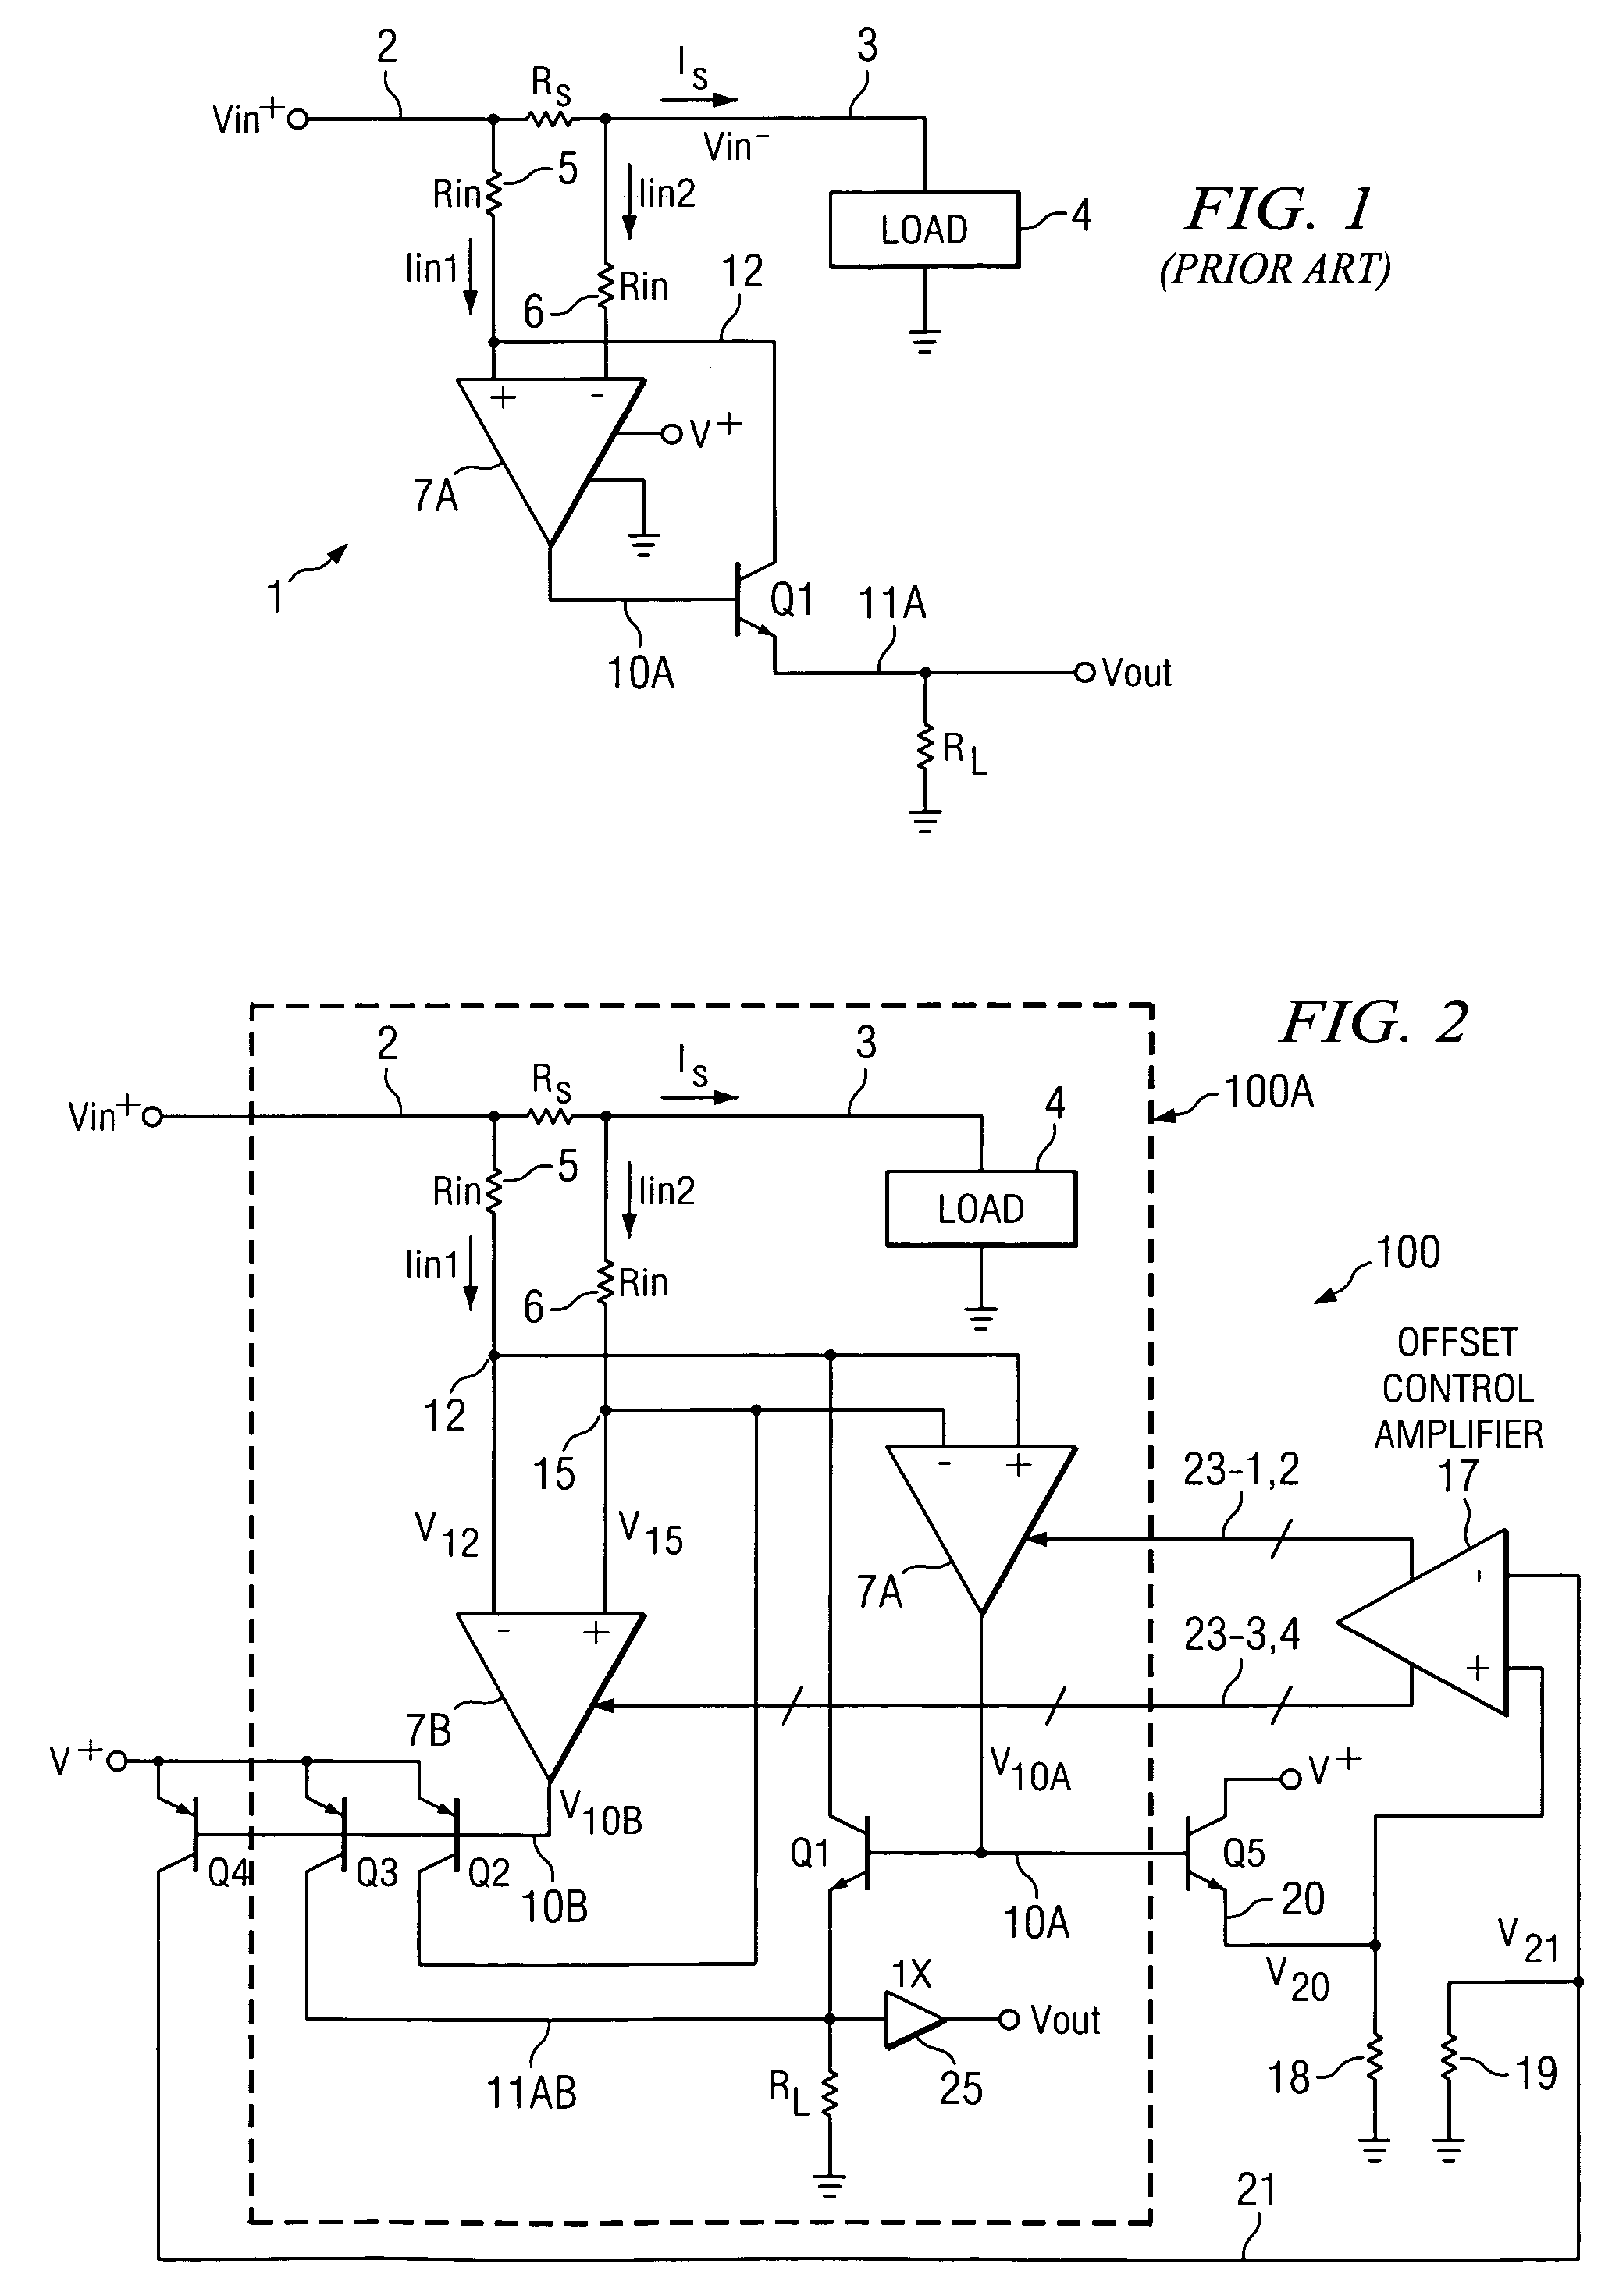 Amplifier switching control circuit and method for current shunt instrumentation amplifier having extended position and negative input common mode range